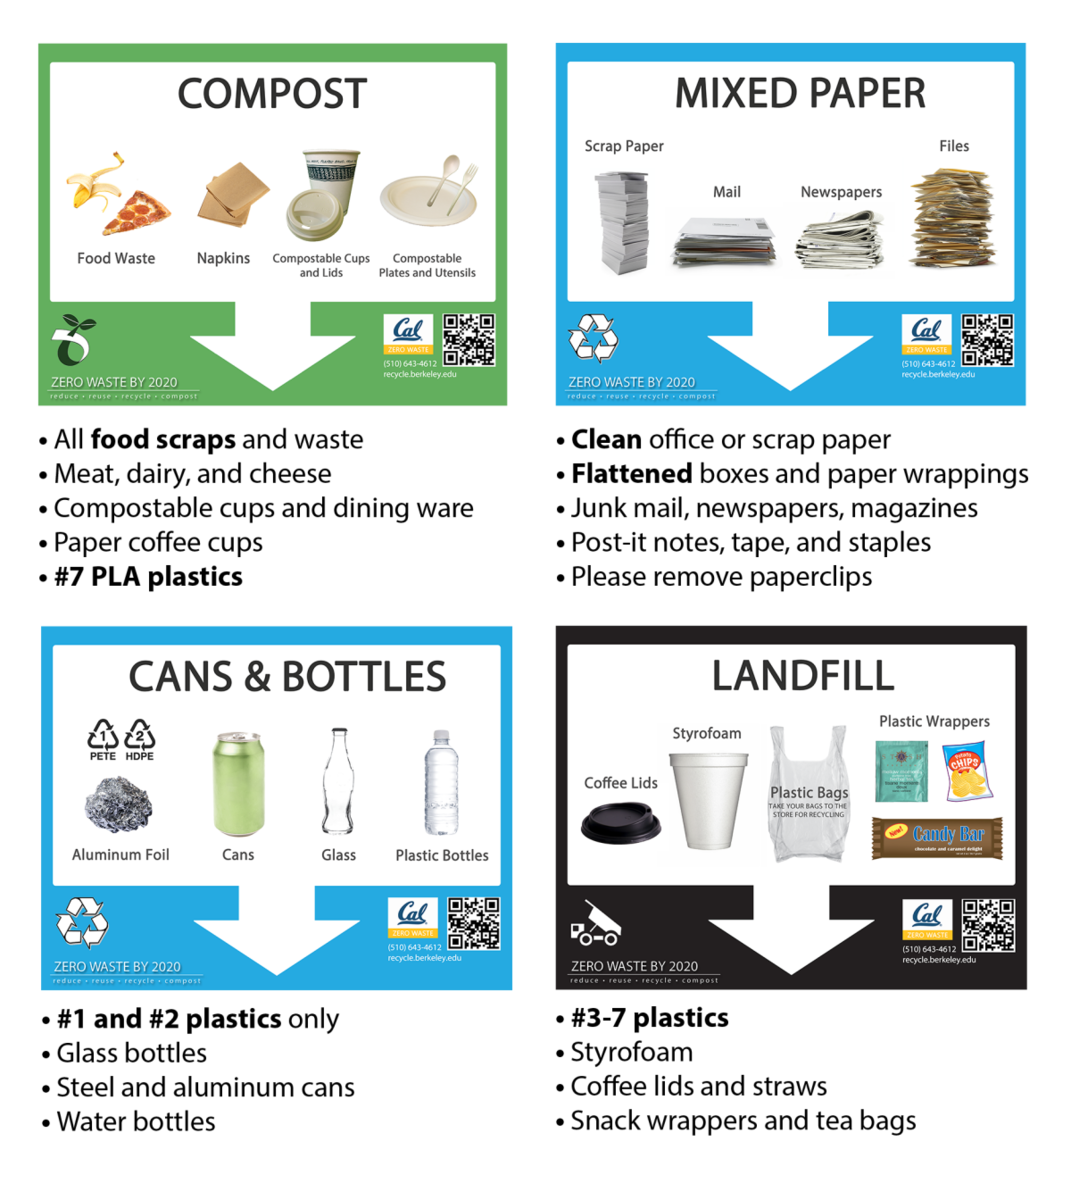 Beverage Containers - Lawrence Berkeley National Lab Waste Guide